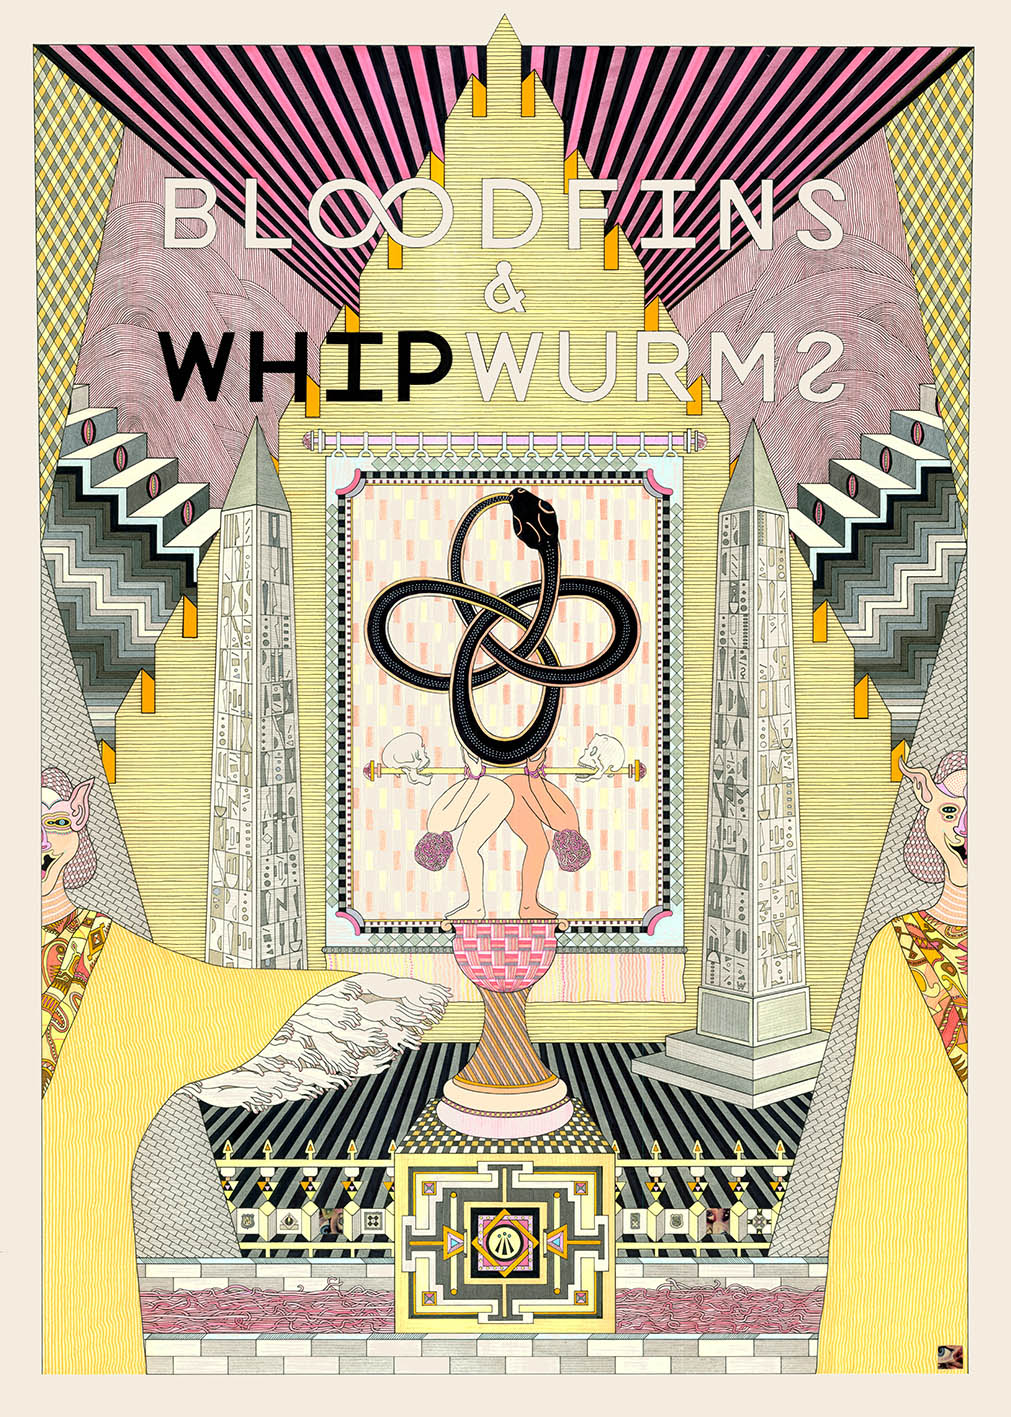 Bloodfins & Whipwurms, 2013 